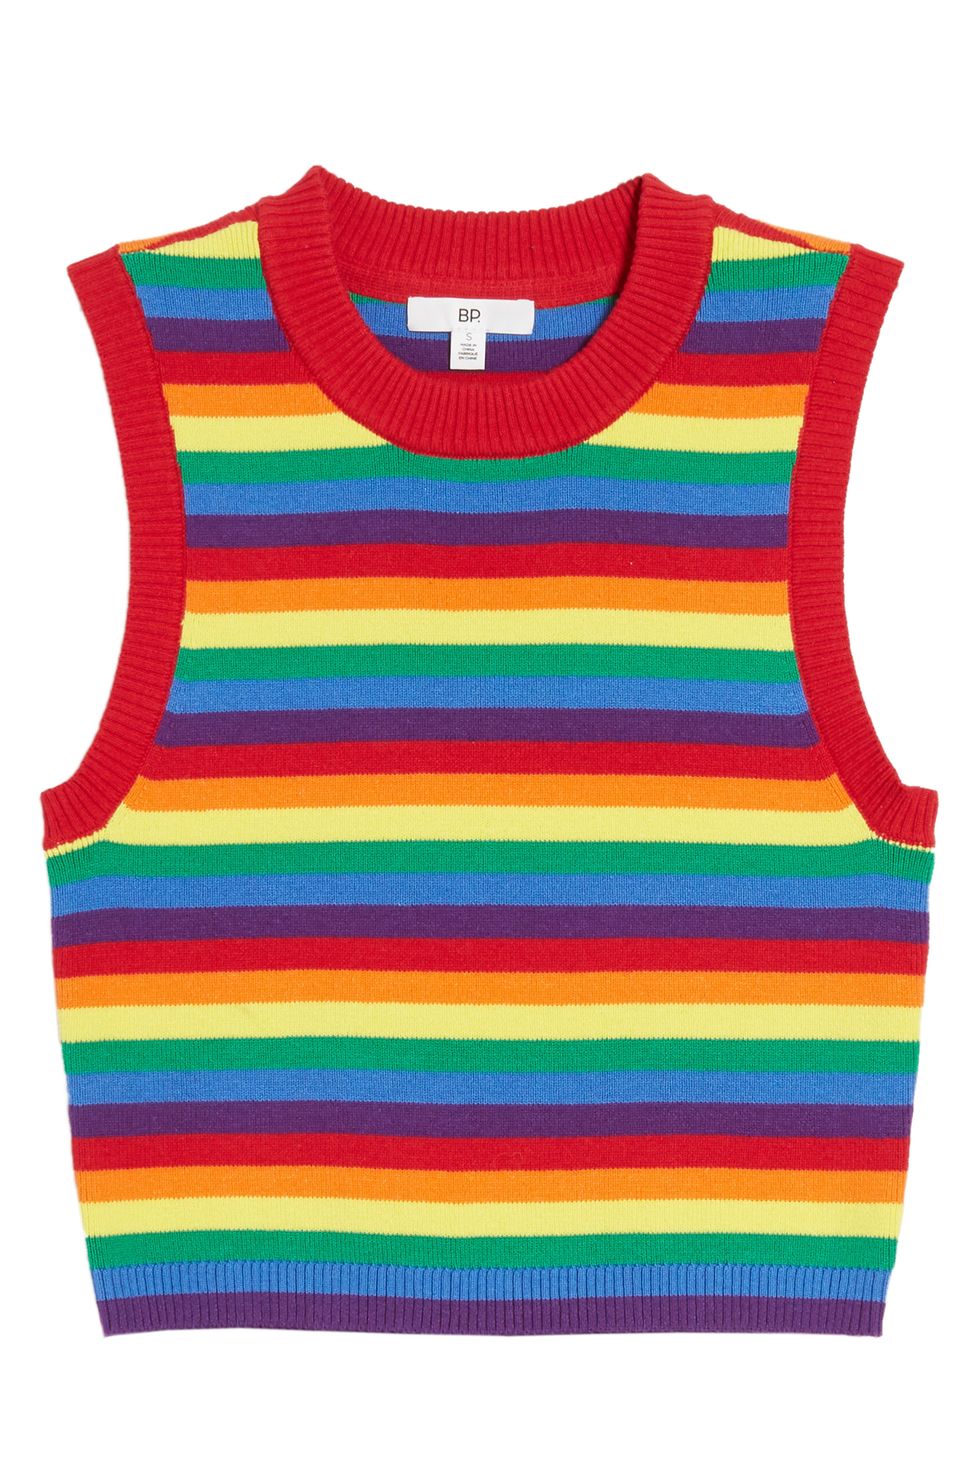 Best Pride Clothing 2022 – LGBTQ Pride Clothes, Apparel, and Accessories